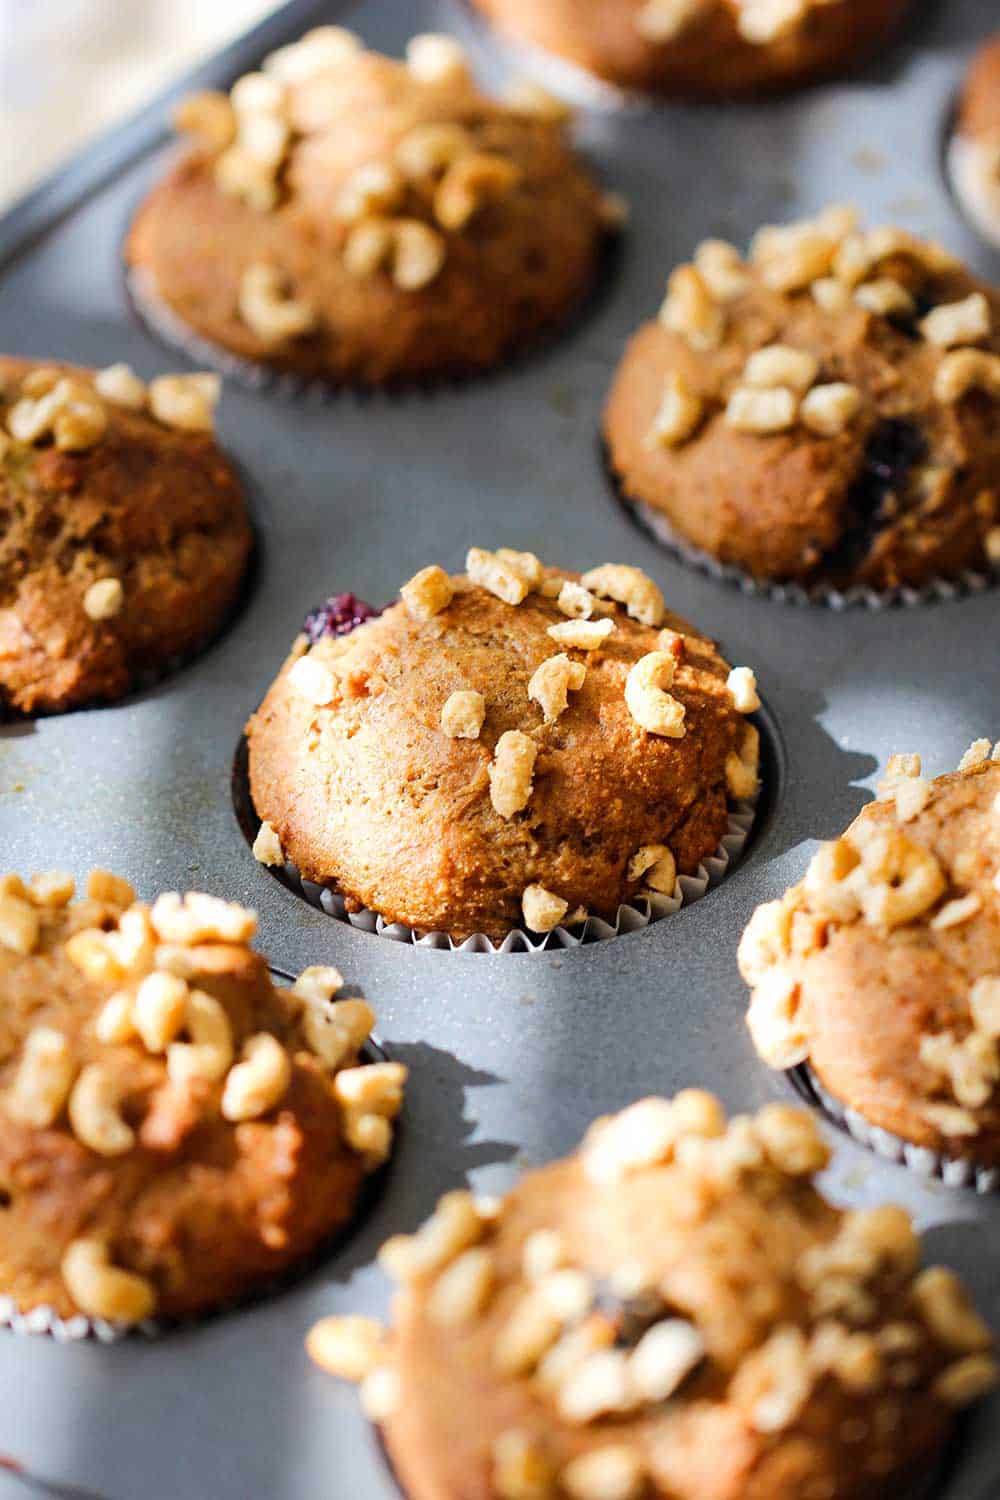 Bake the banana blueberry muffins in a metal muffin tin. 